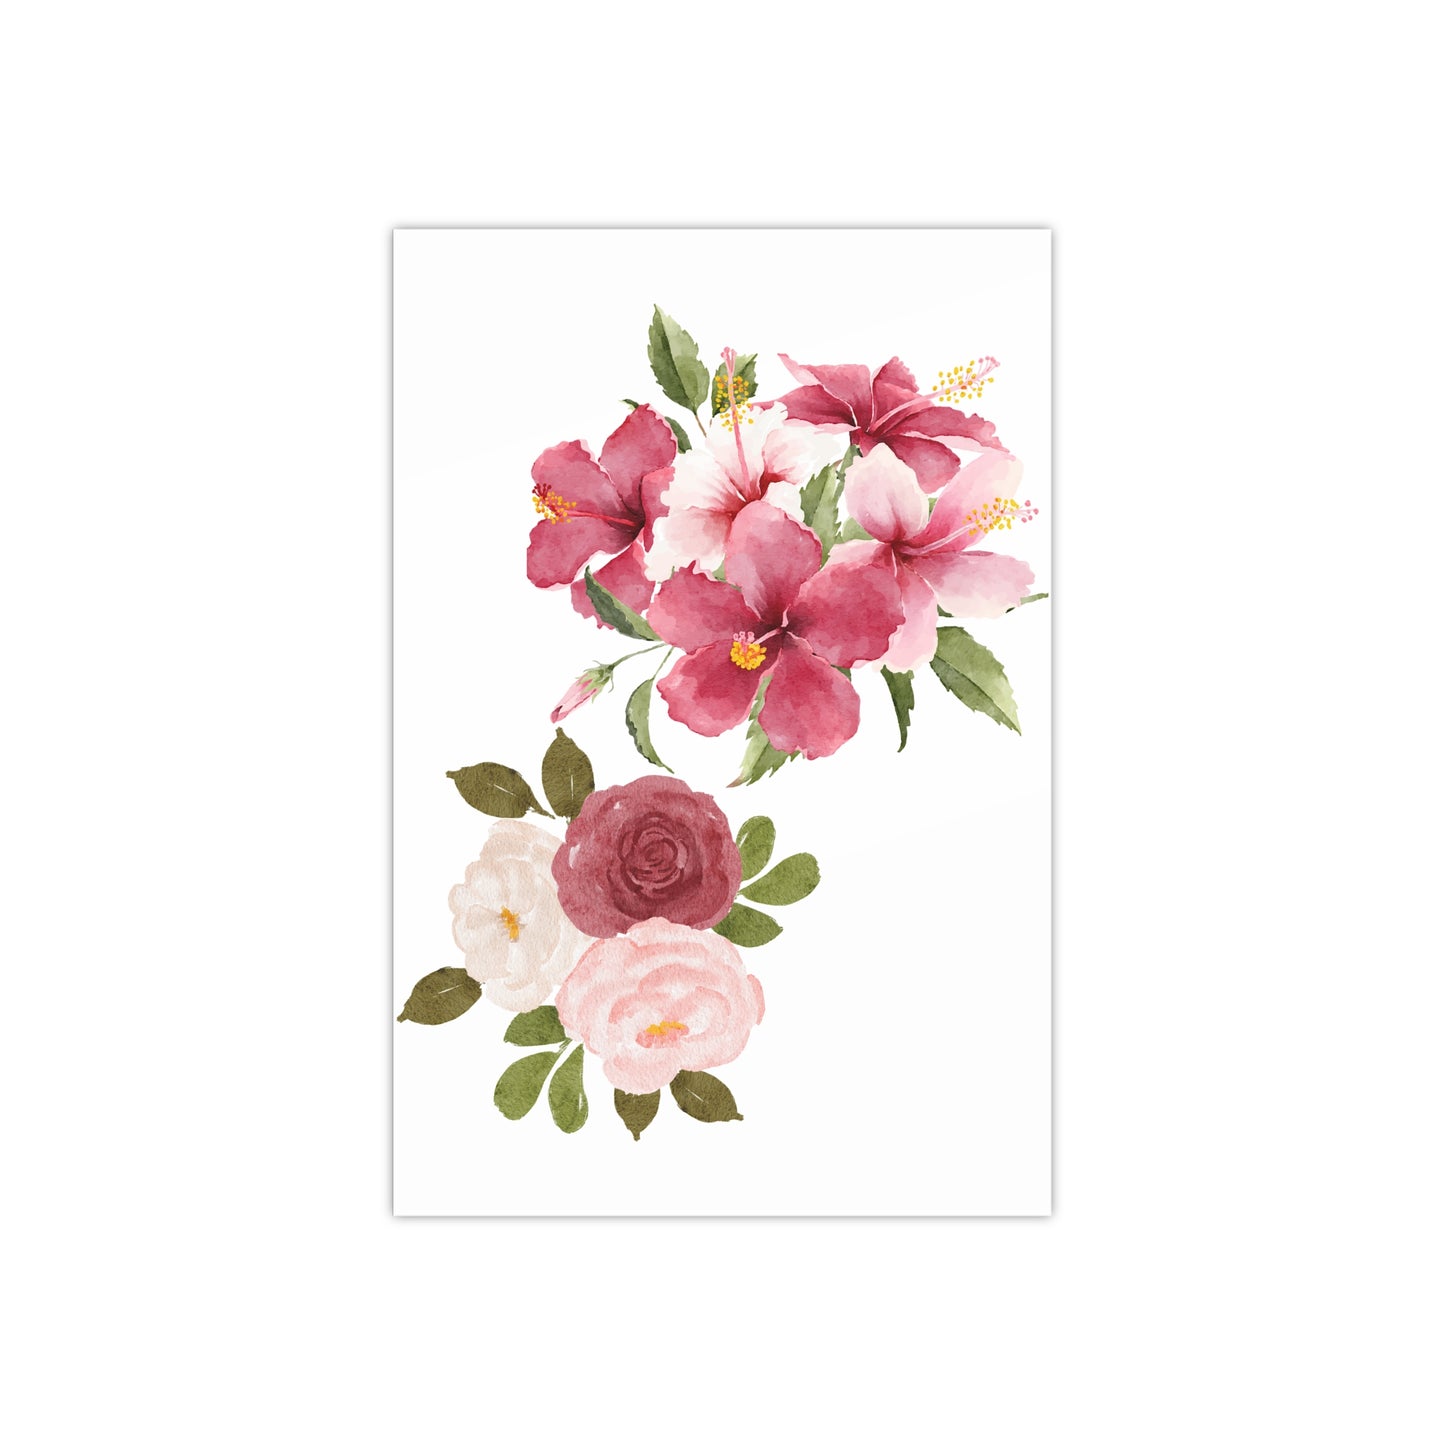 Vibrant Bouquet of Hibiscus and Roses　Posters (300gsm)